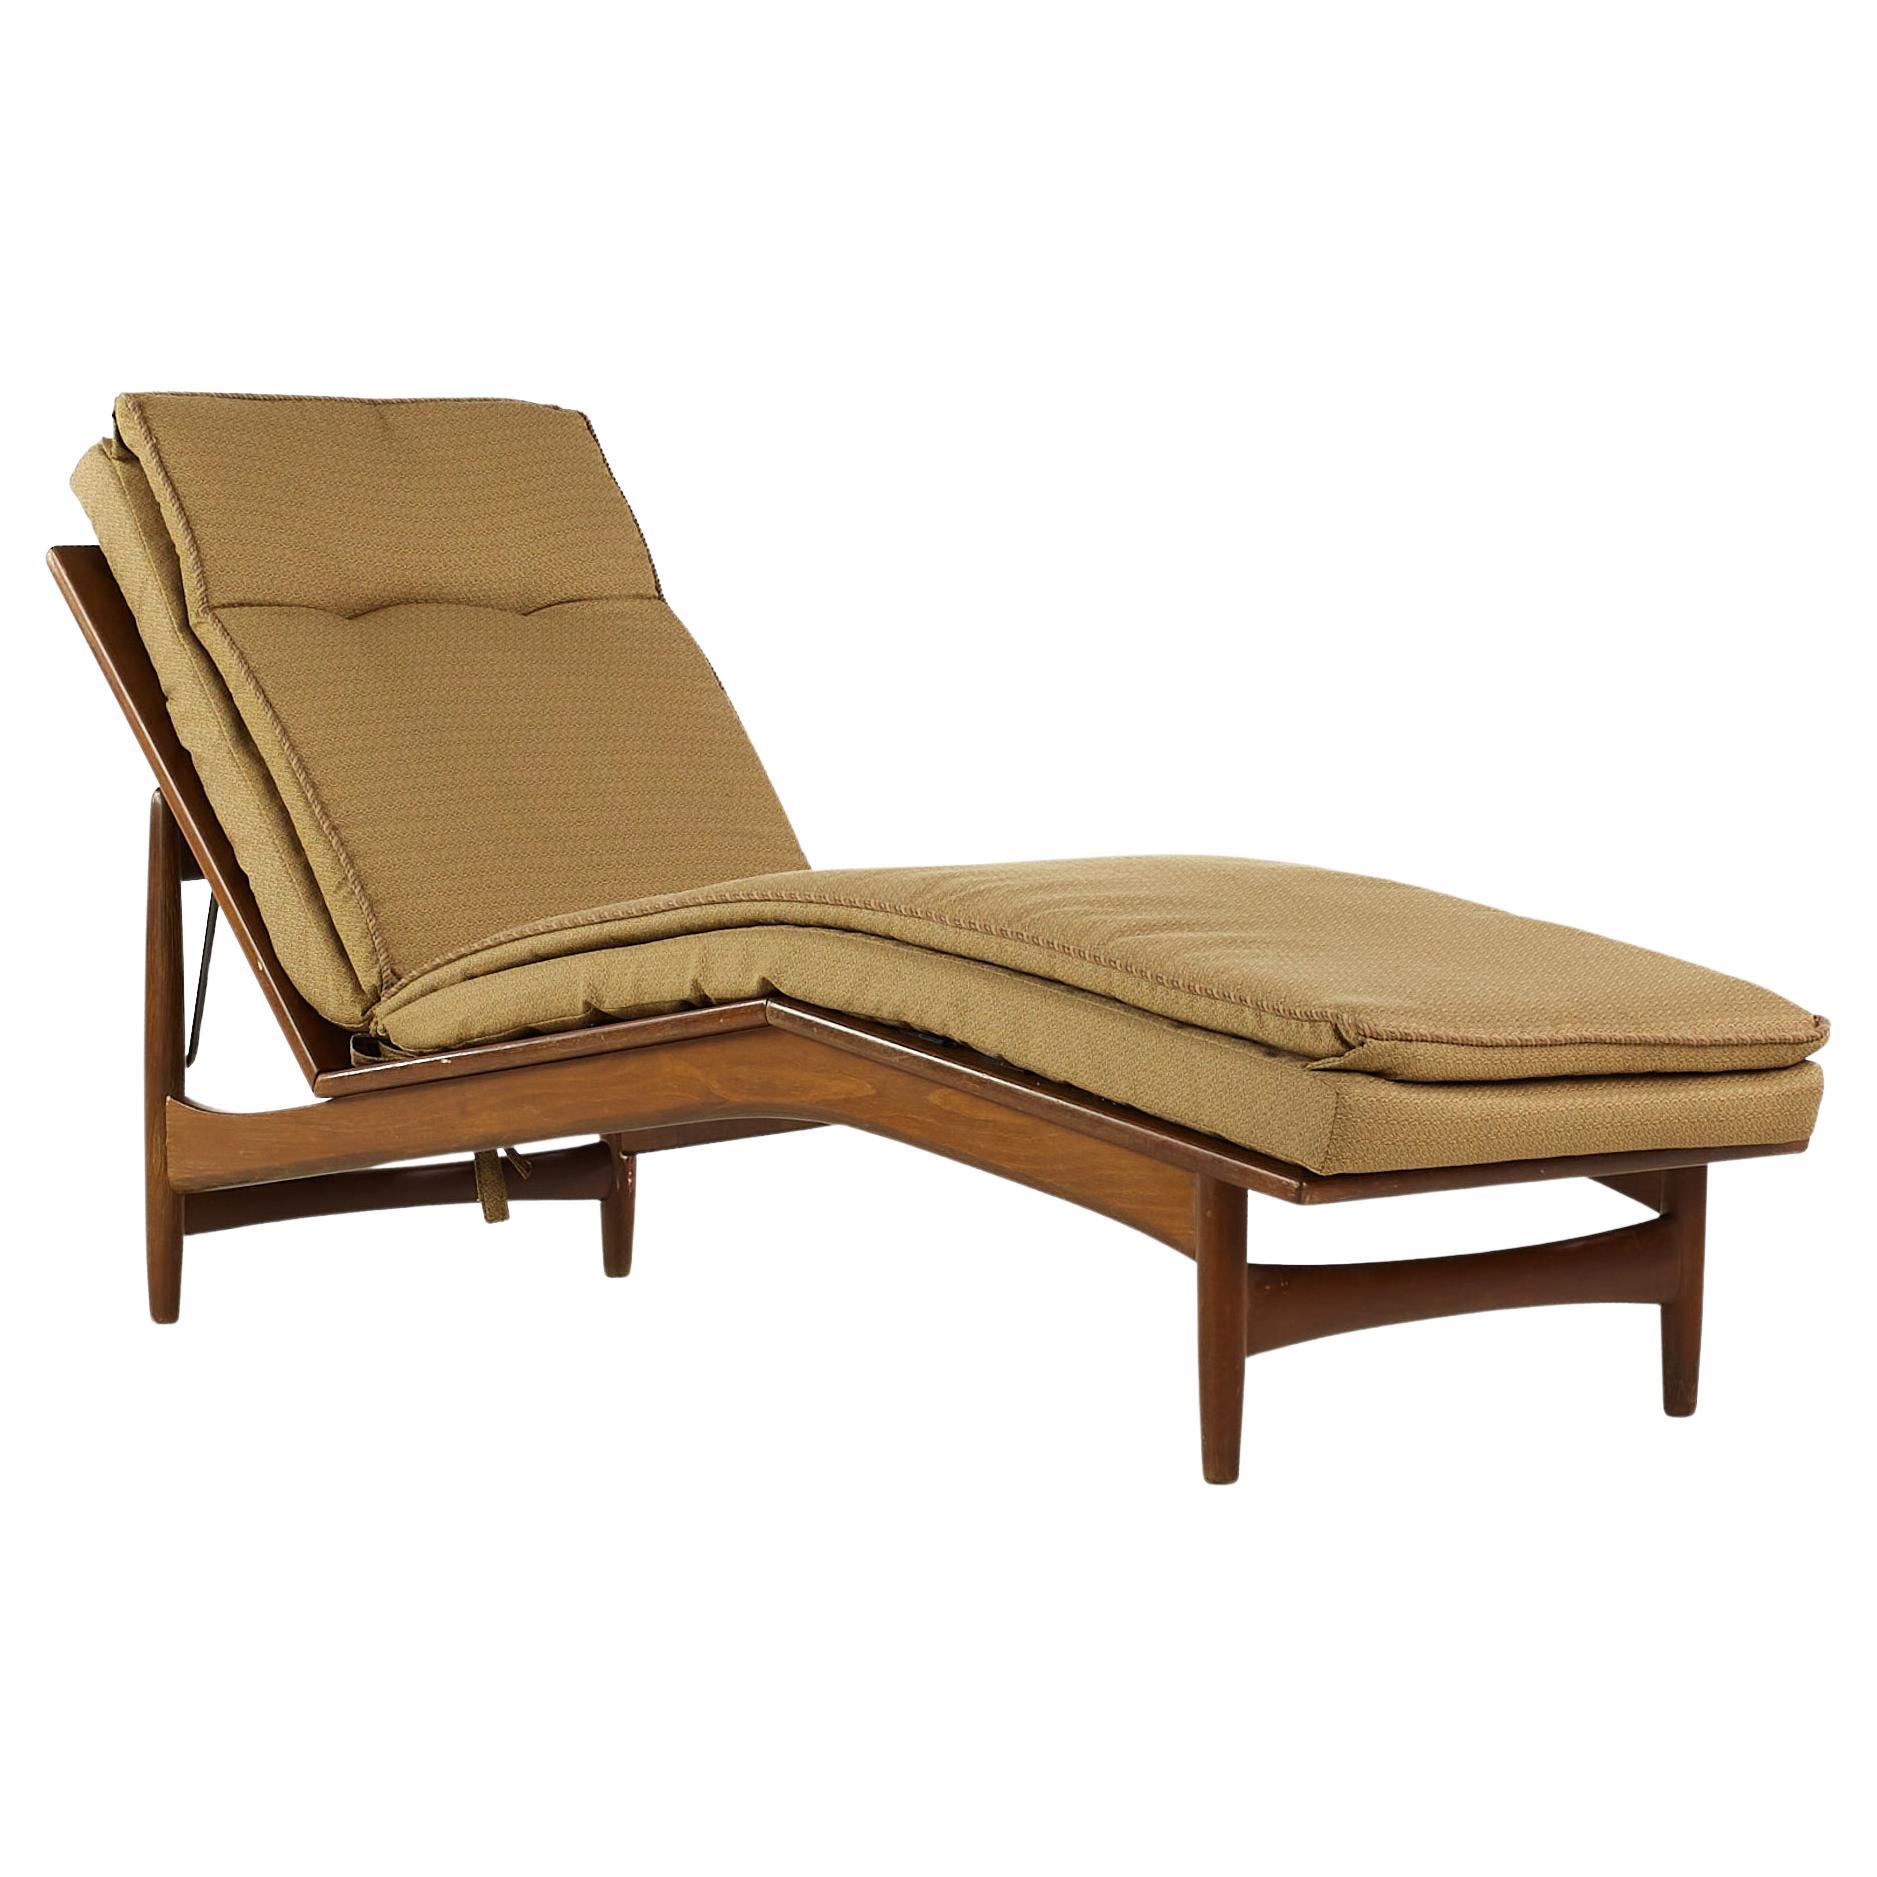 Kofod Larsen for Selig Mid Century Walnut Chaise Lounge Chair